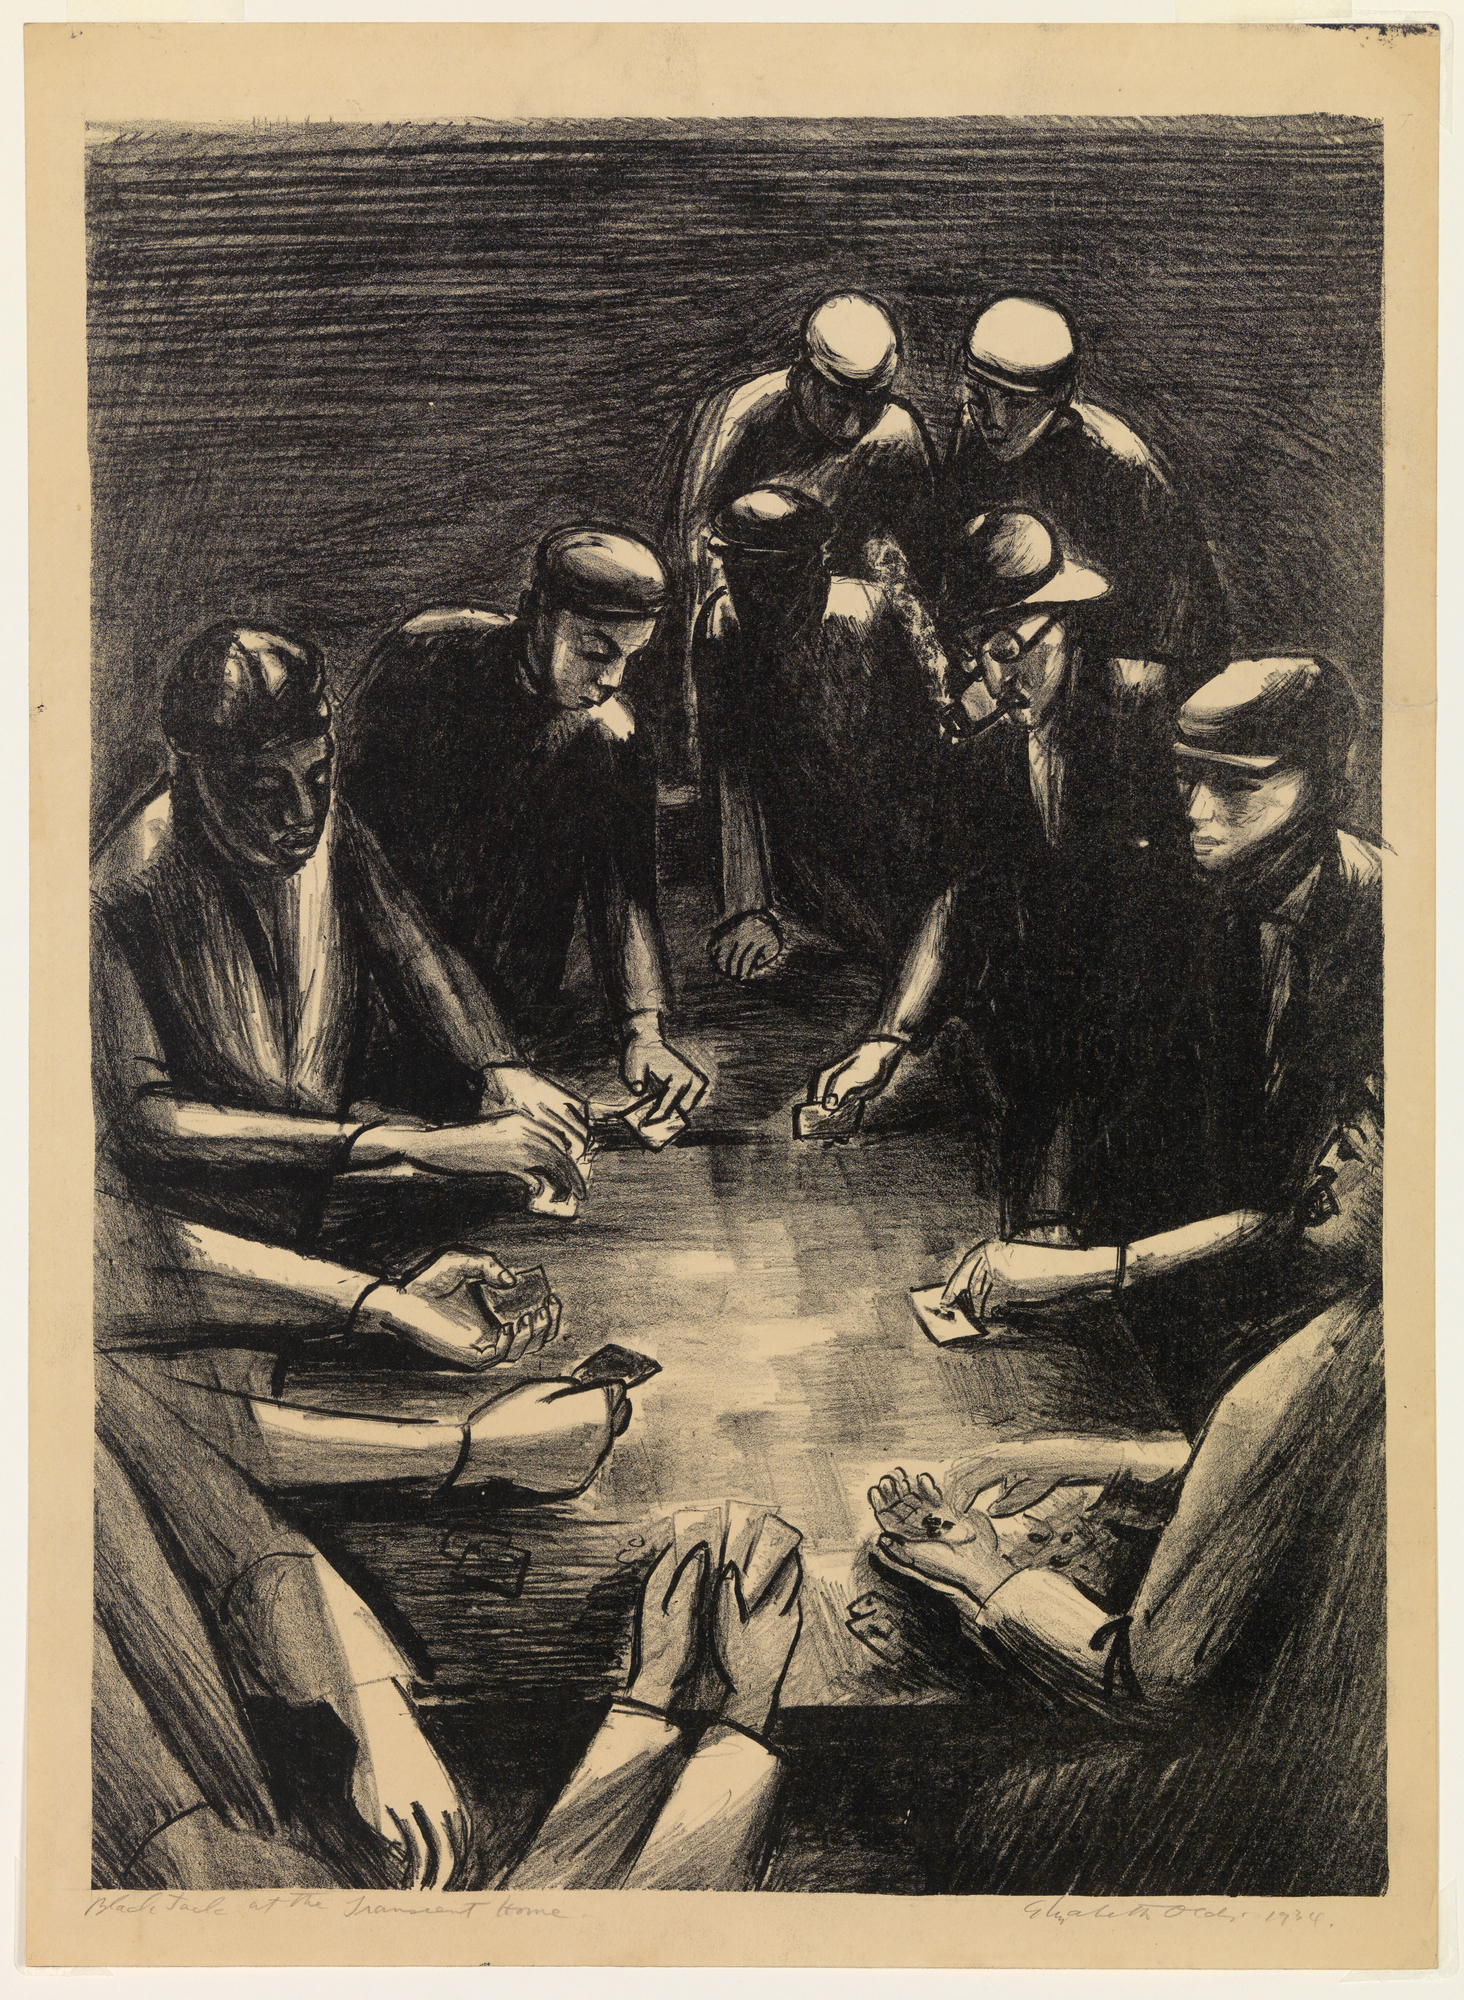 A group of men stand and sit around a table playing cards. They all appear from the same social class save for one man wearing a fedora and smoking a pipe.